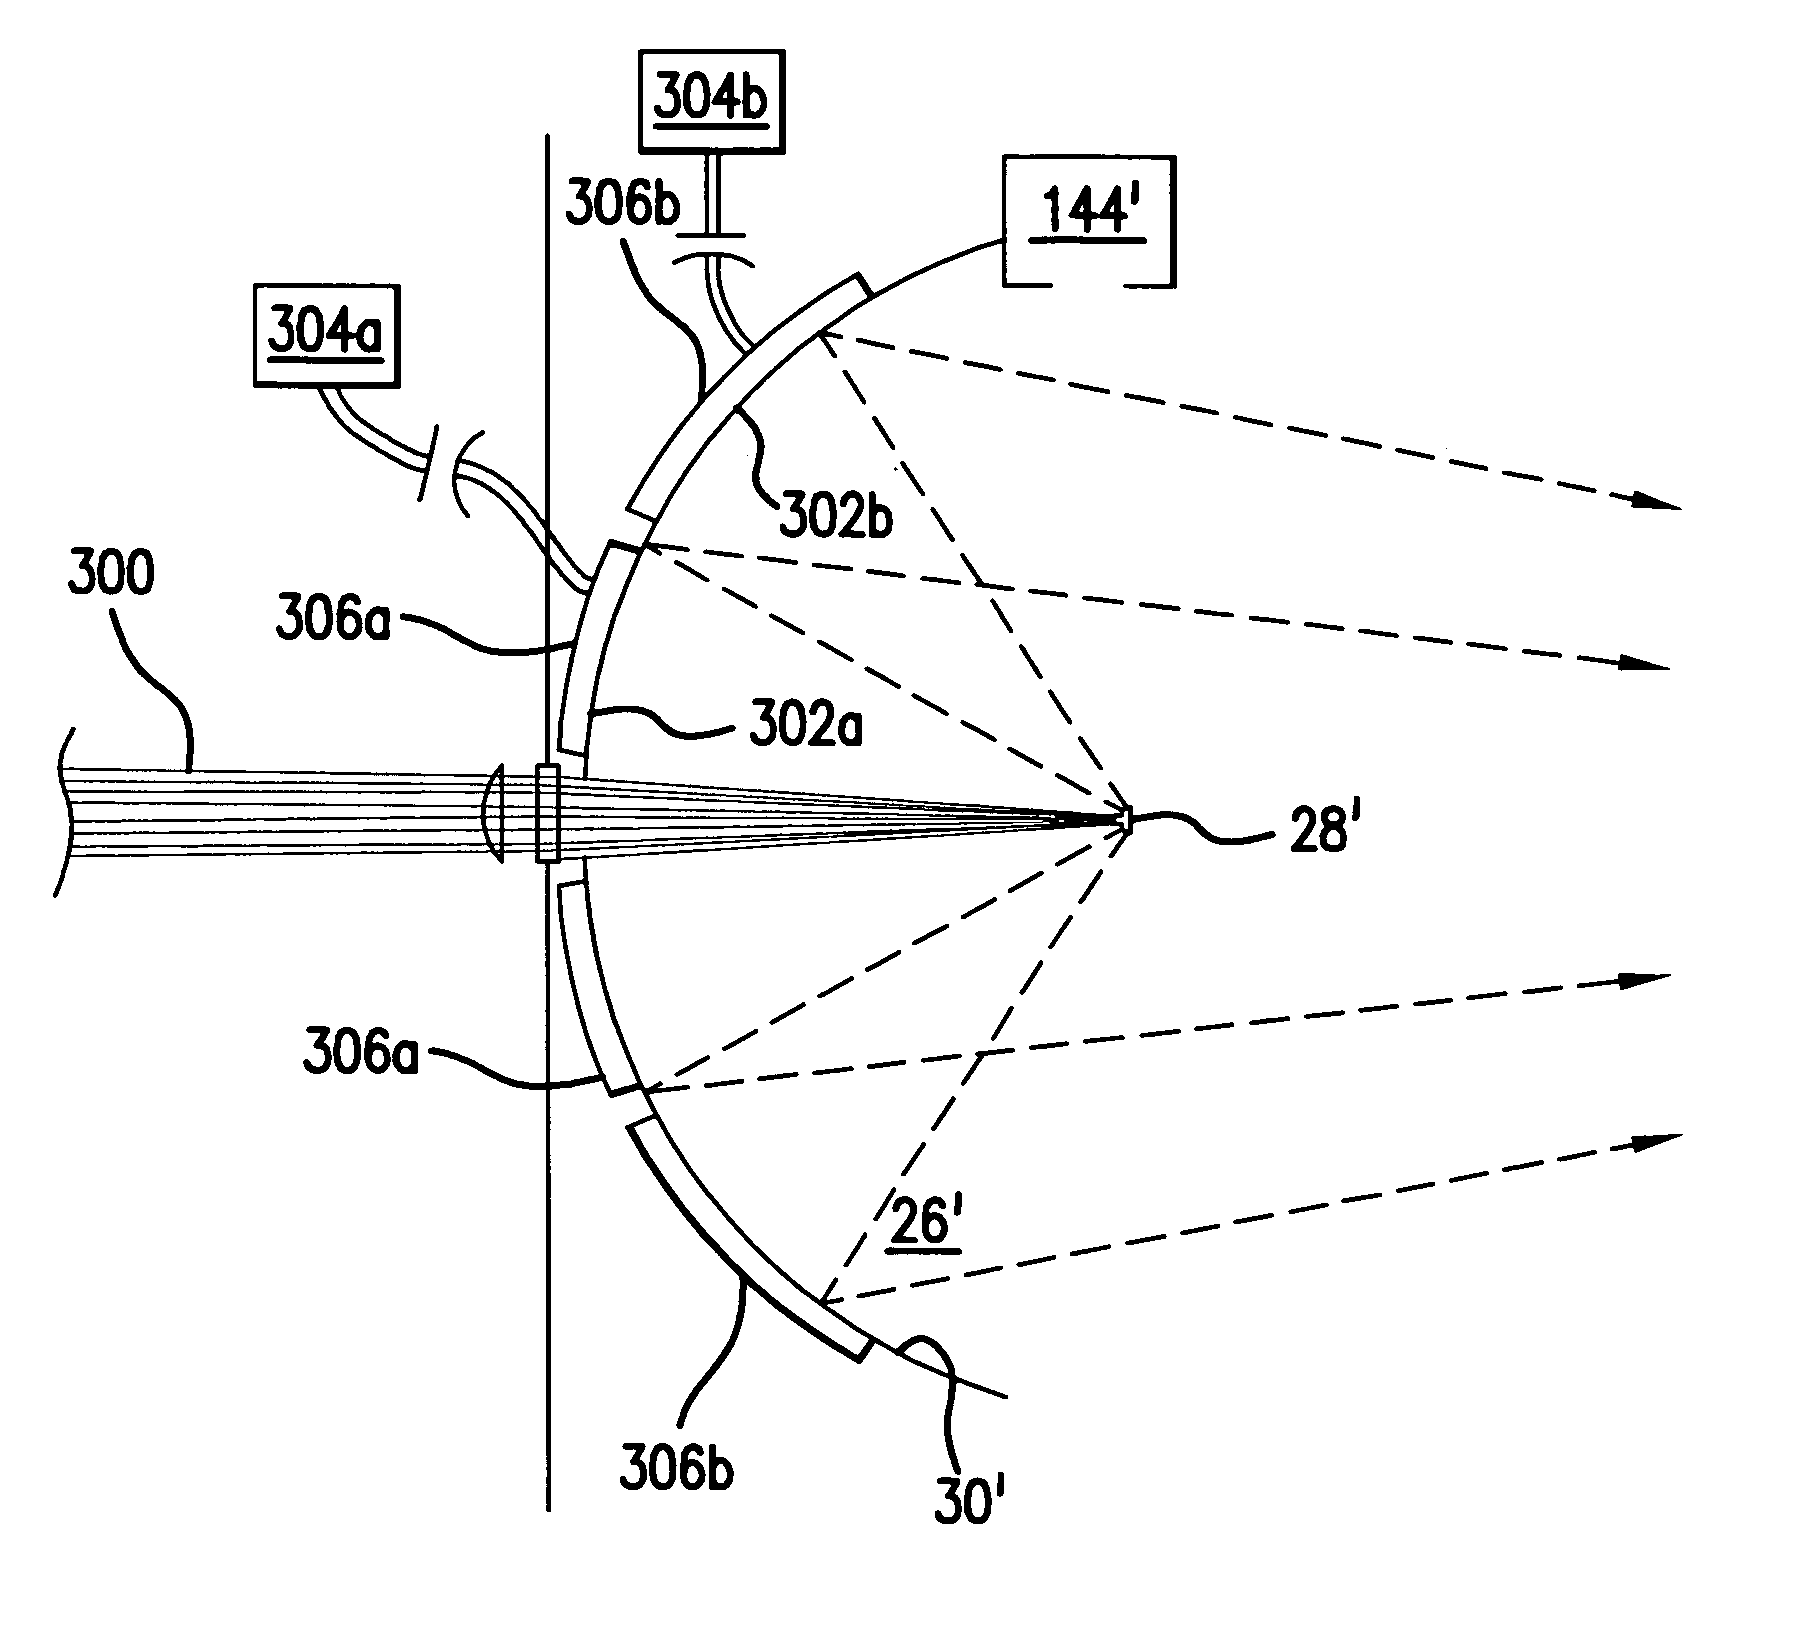 Systems and methods for reducing the influence of plasma-generated debris on the internal components of an EUV light source